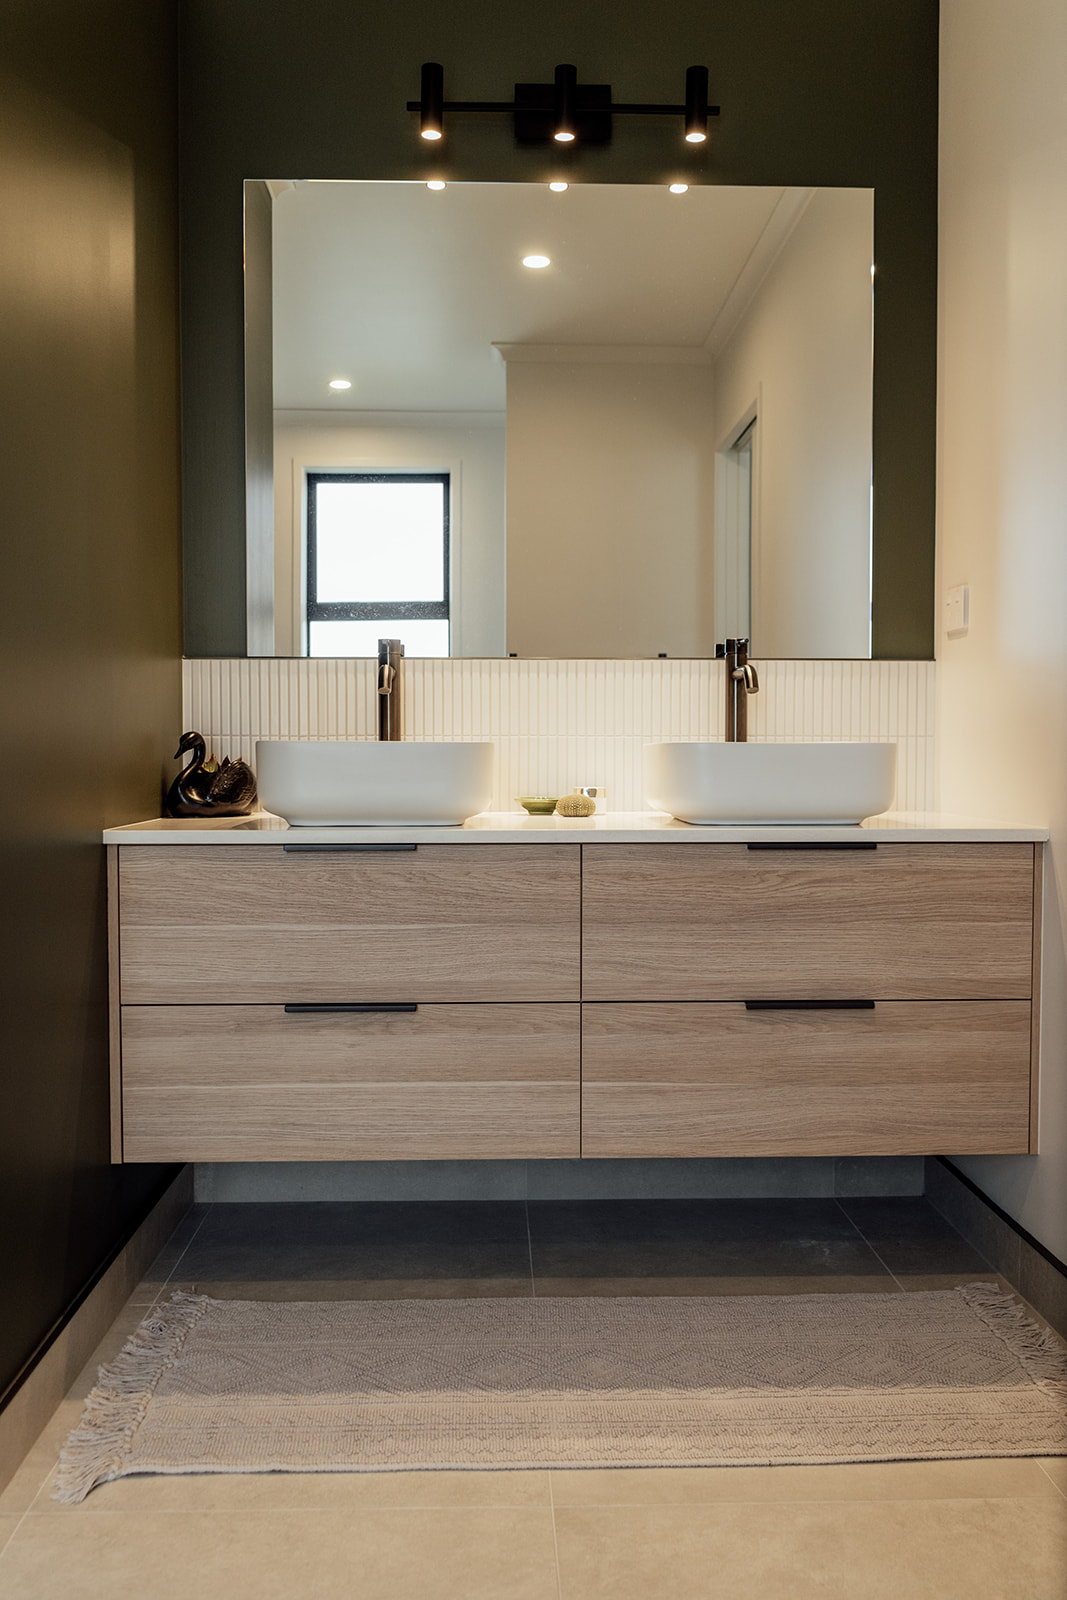 Light wood grain vanity floating off the floor with 2 top mounted basins on a slim white benchtop. Large square mirrorwith black feature lights above.